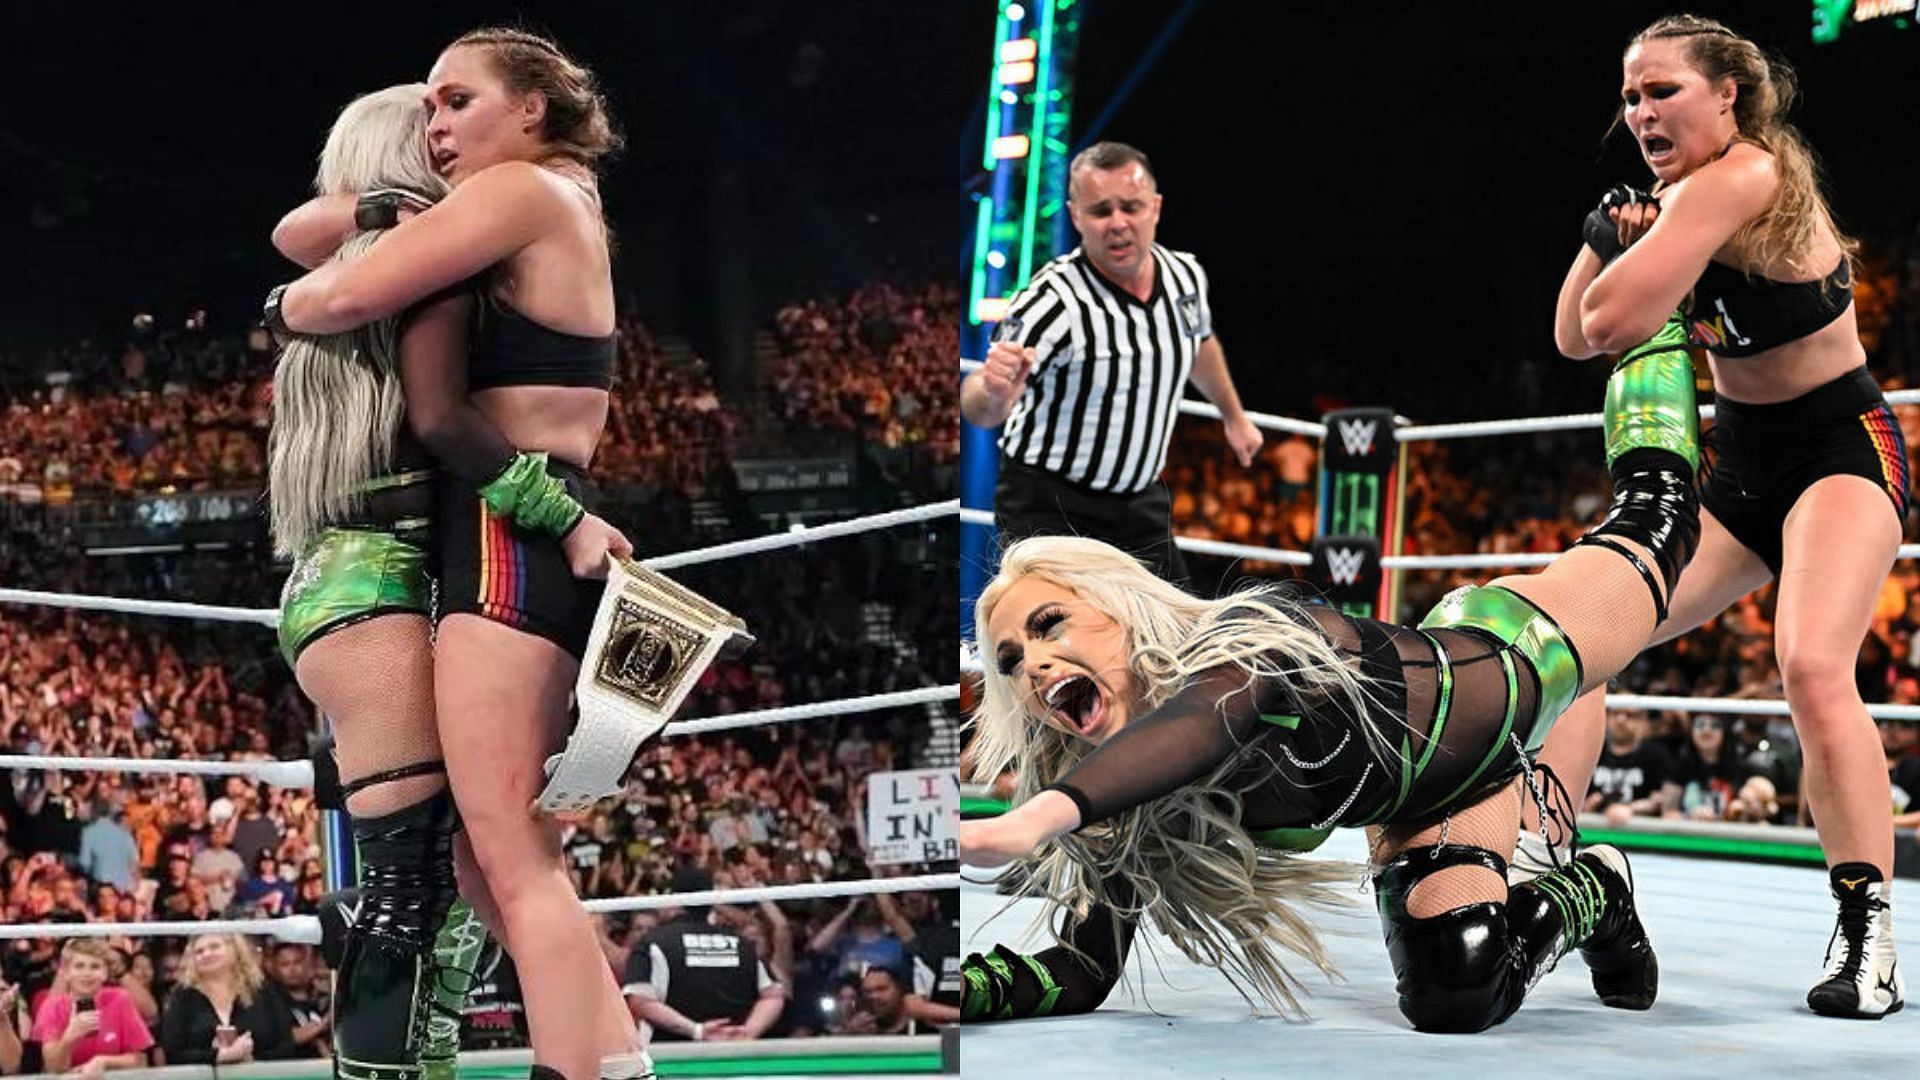 Liv Morgan and Ronda Rousey faced each other in a short match at Money in the Bank 2022